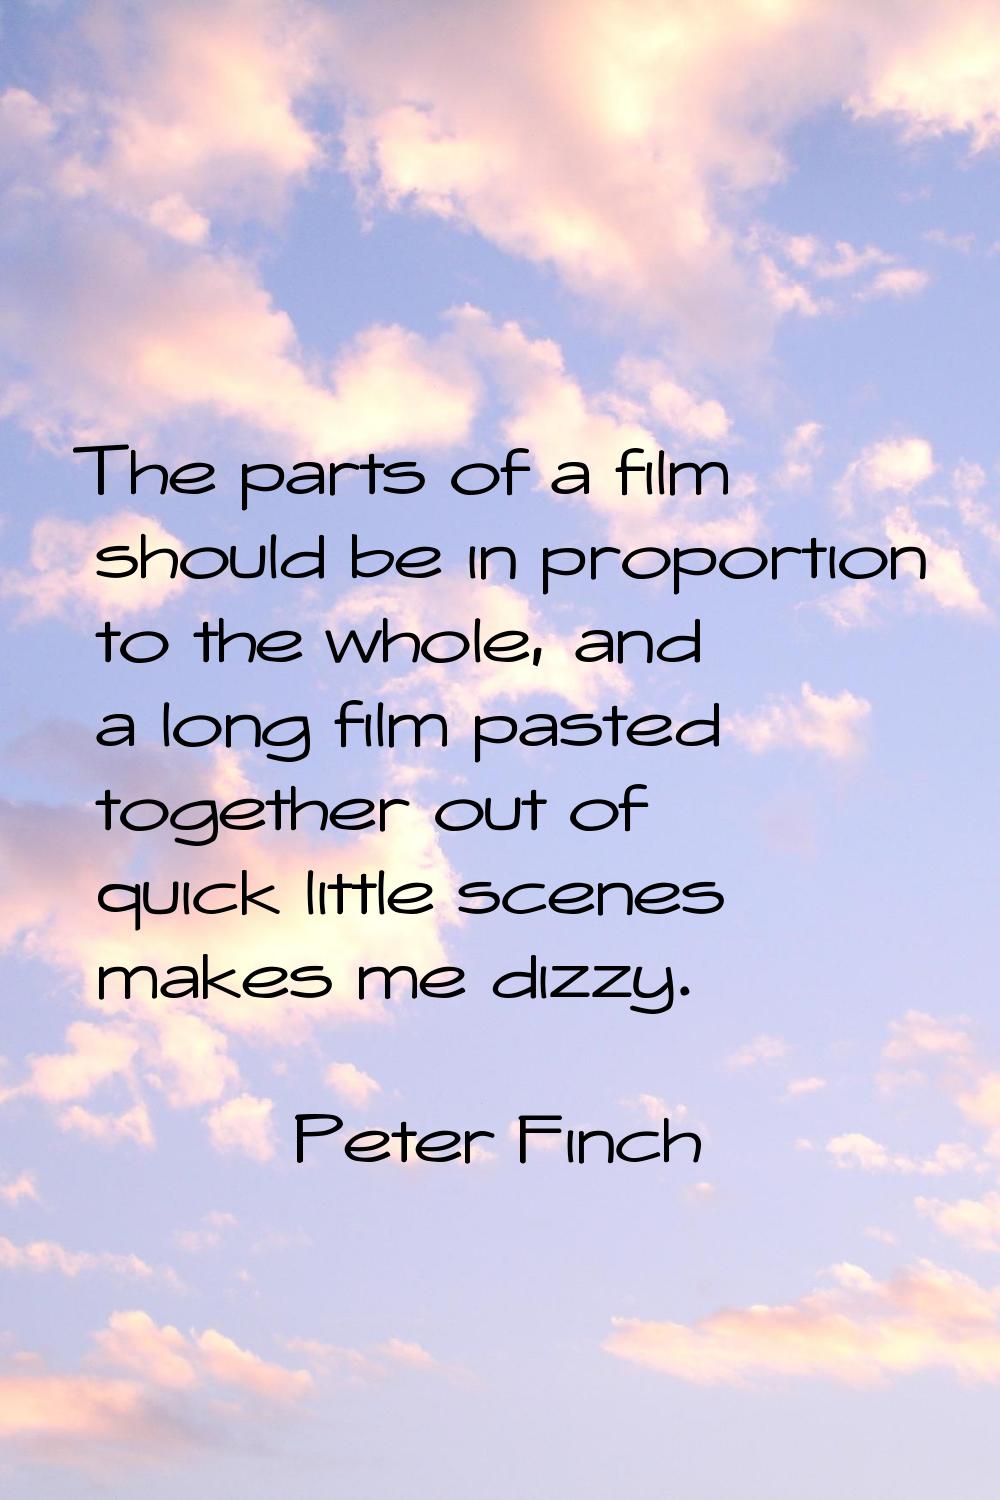 The parts of a film should be in proportion to the whole, and a long film pasted together out of qu